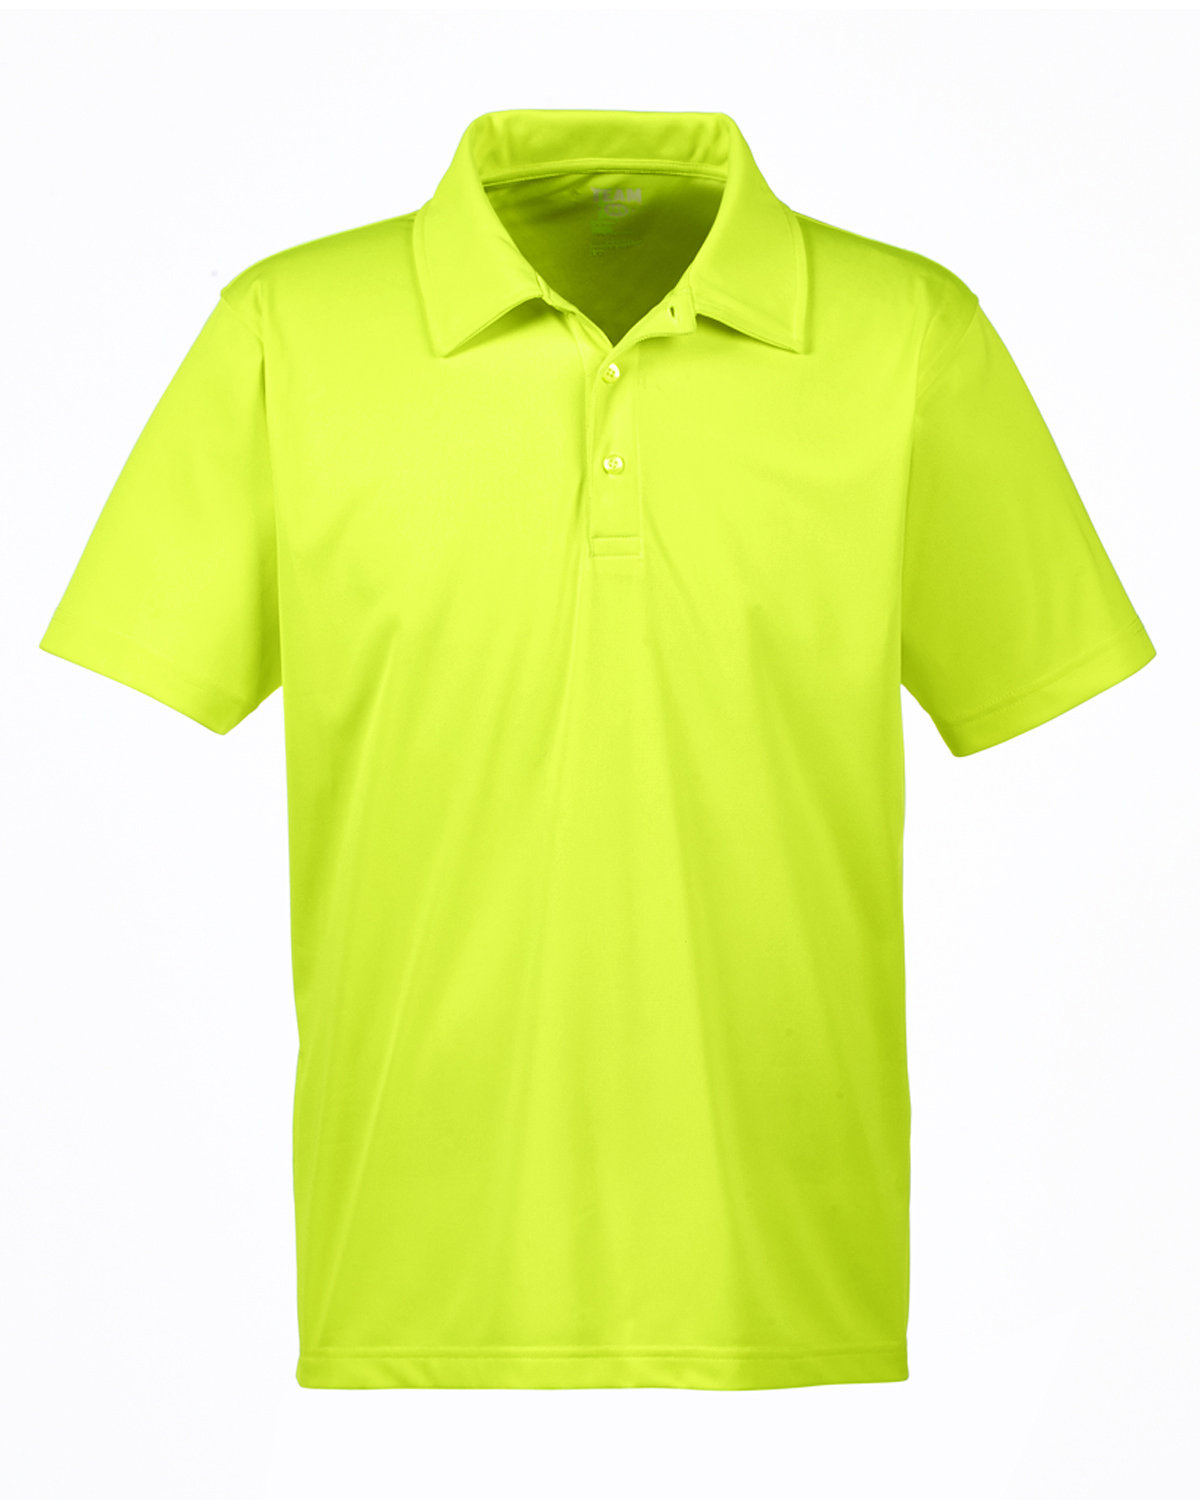 Picture of Team 365 Men's Command Snag Protection Polo